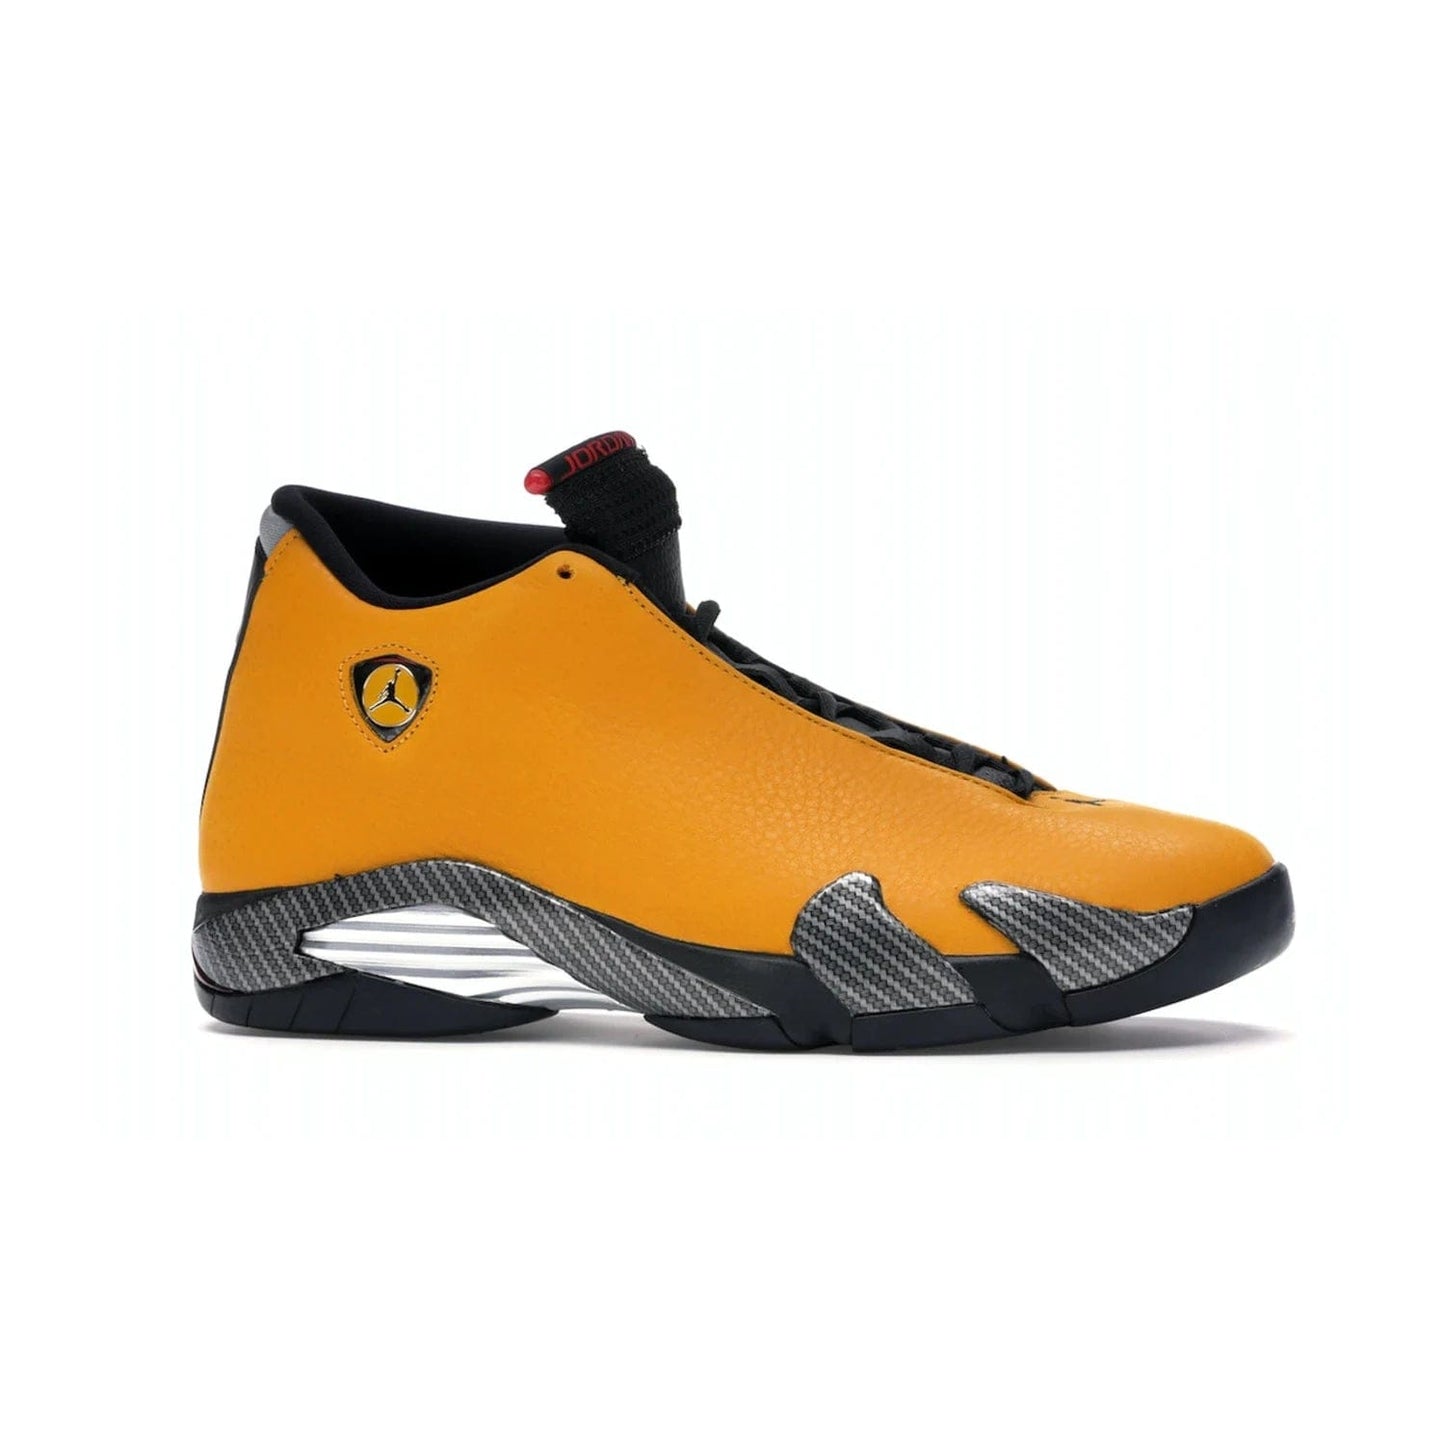 Jordan 14 Retro University Gold - Image 2 - Only at www.BallersClubKickz.com - Air Jordan 14 Retro University Gold: High-quality leather sneaker with Jumpman, tongue & heel logos. Zoom Air units & herringbone traction for superior comfort. University Gold outsole for stylish streetwear.